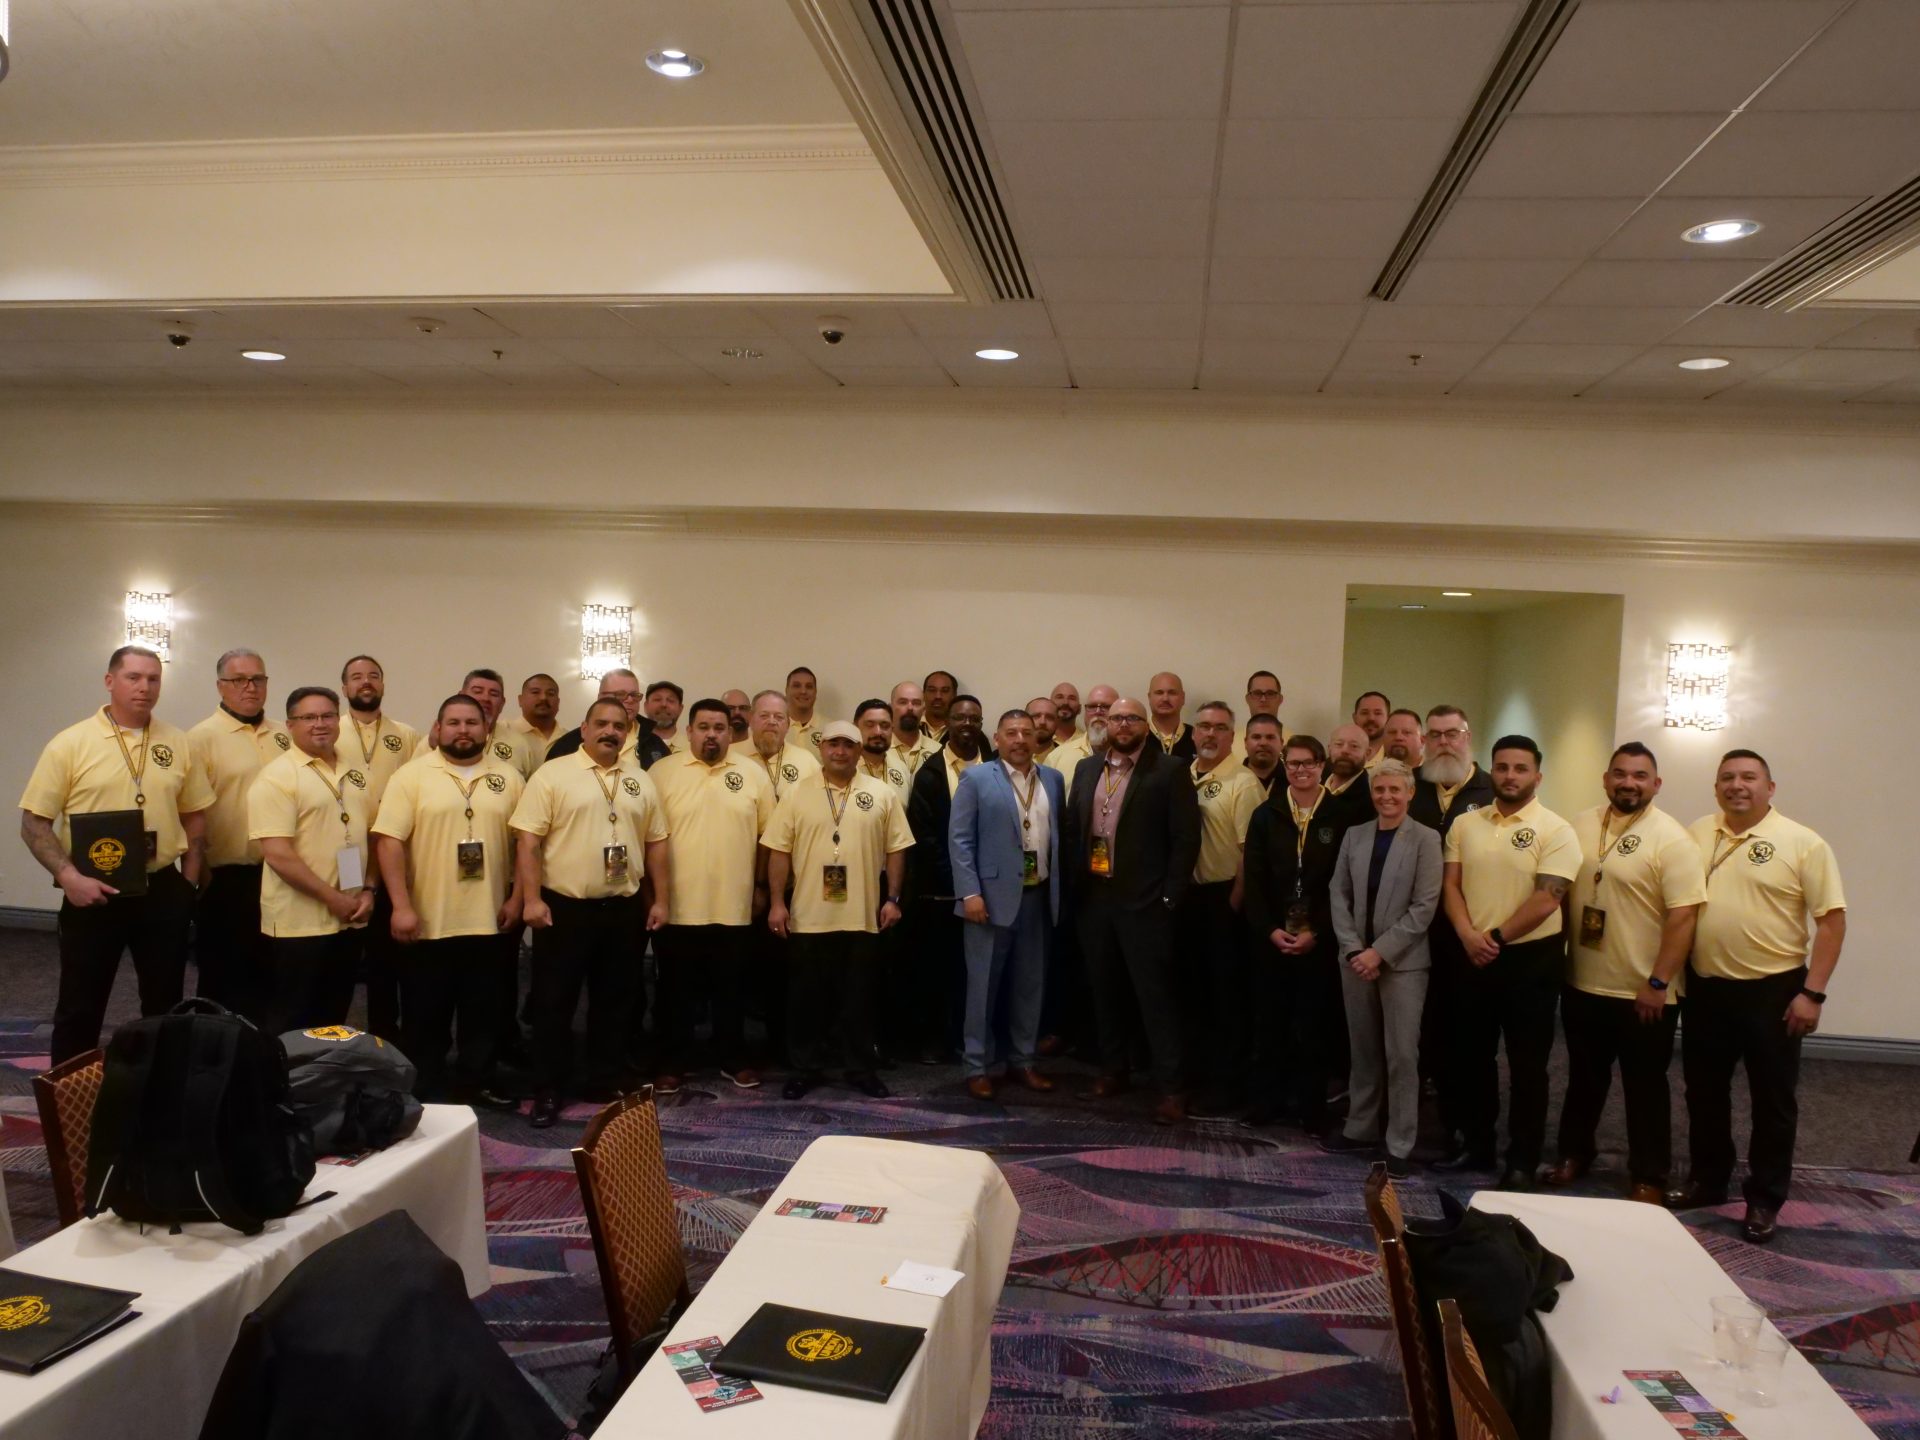 Image from the Gallery: Western Regional Conference – Las Vegas, NV